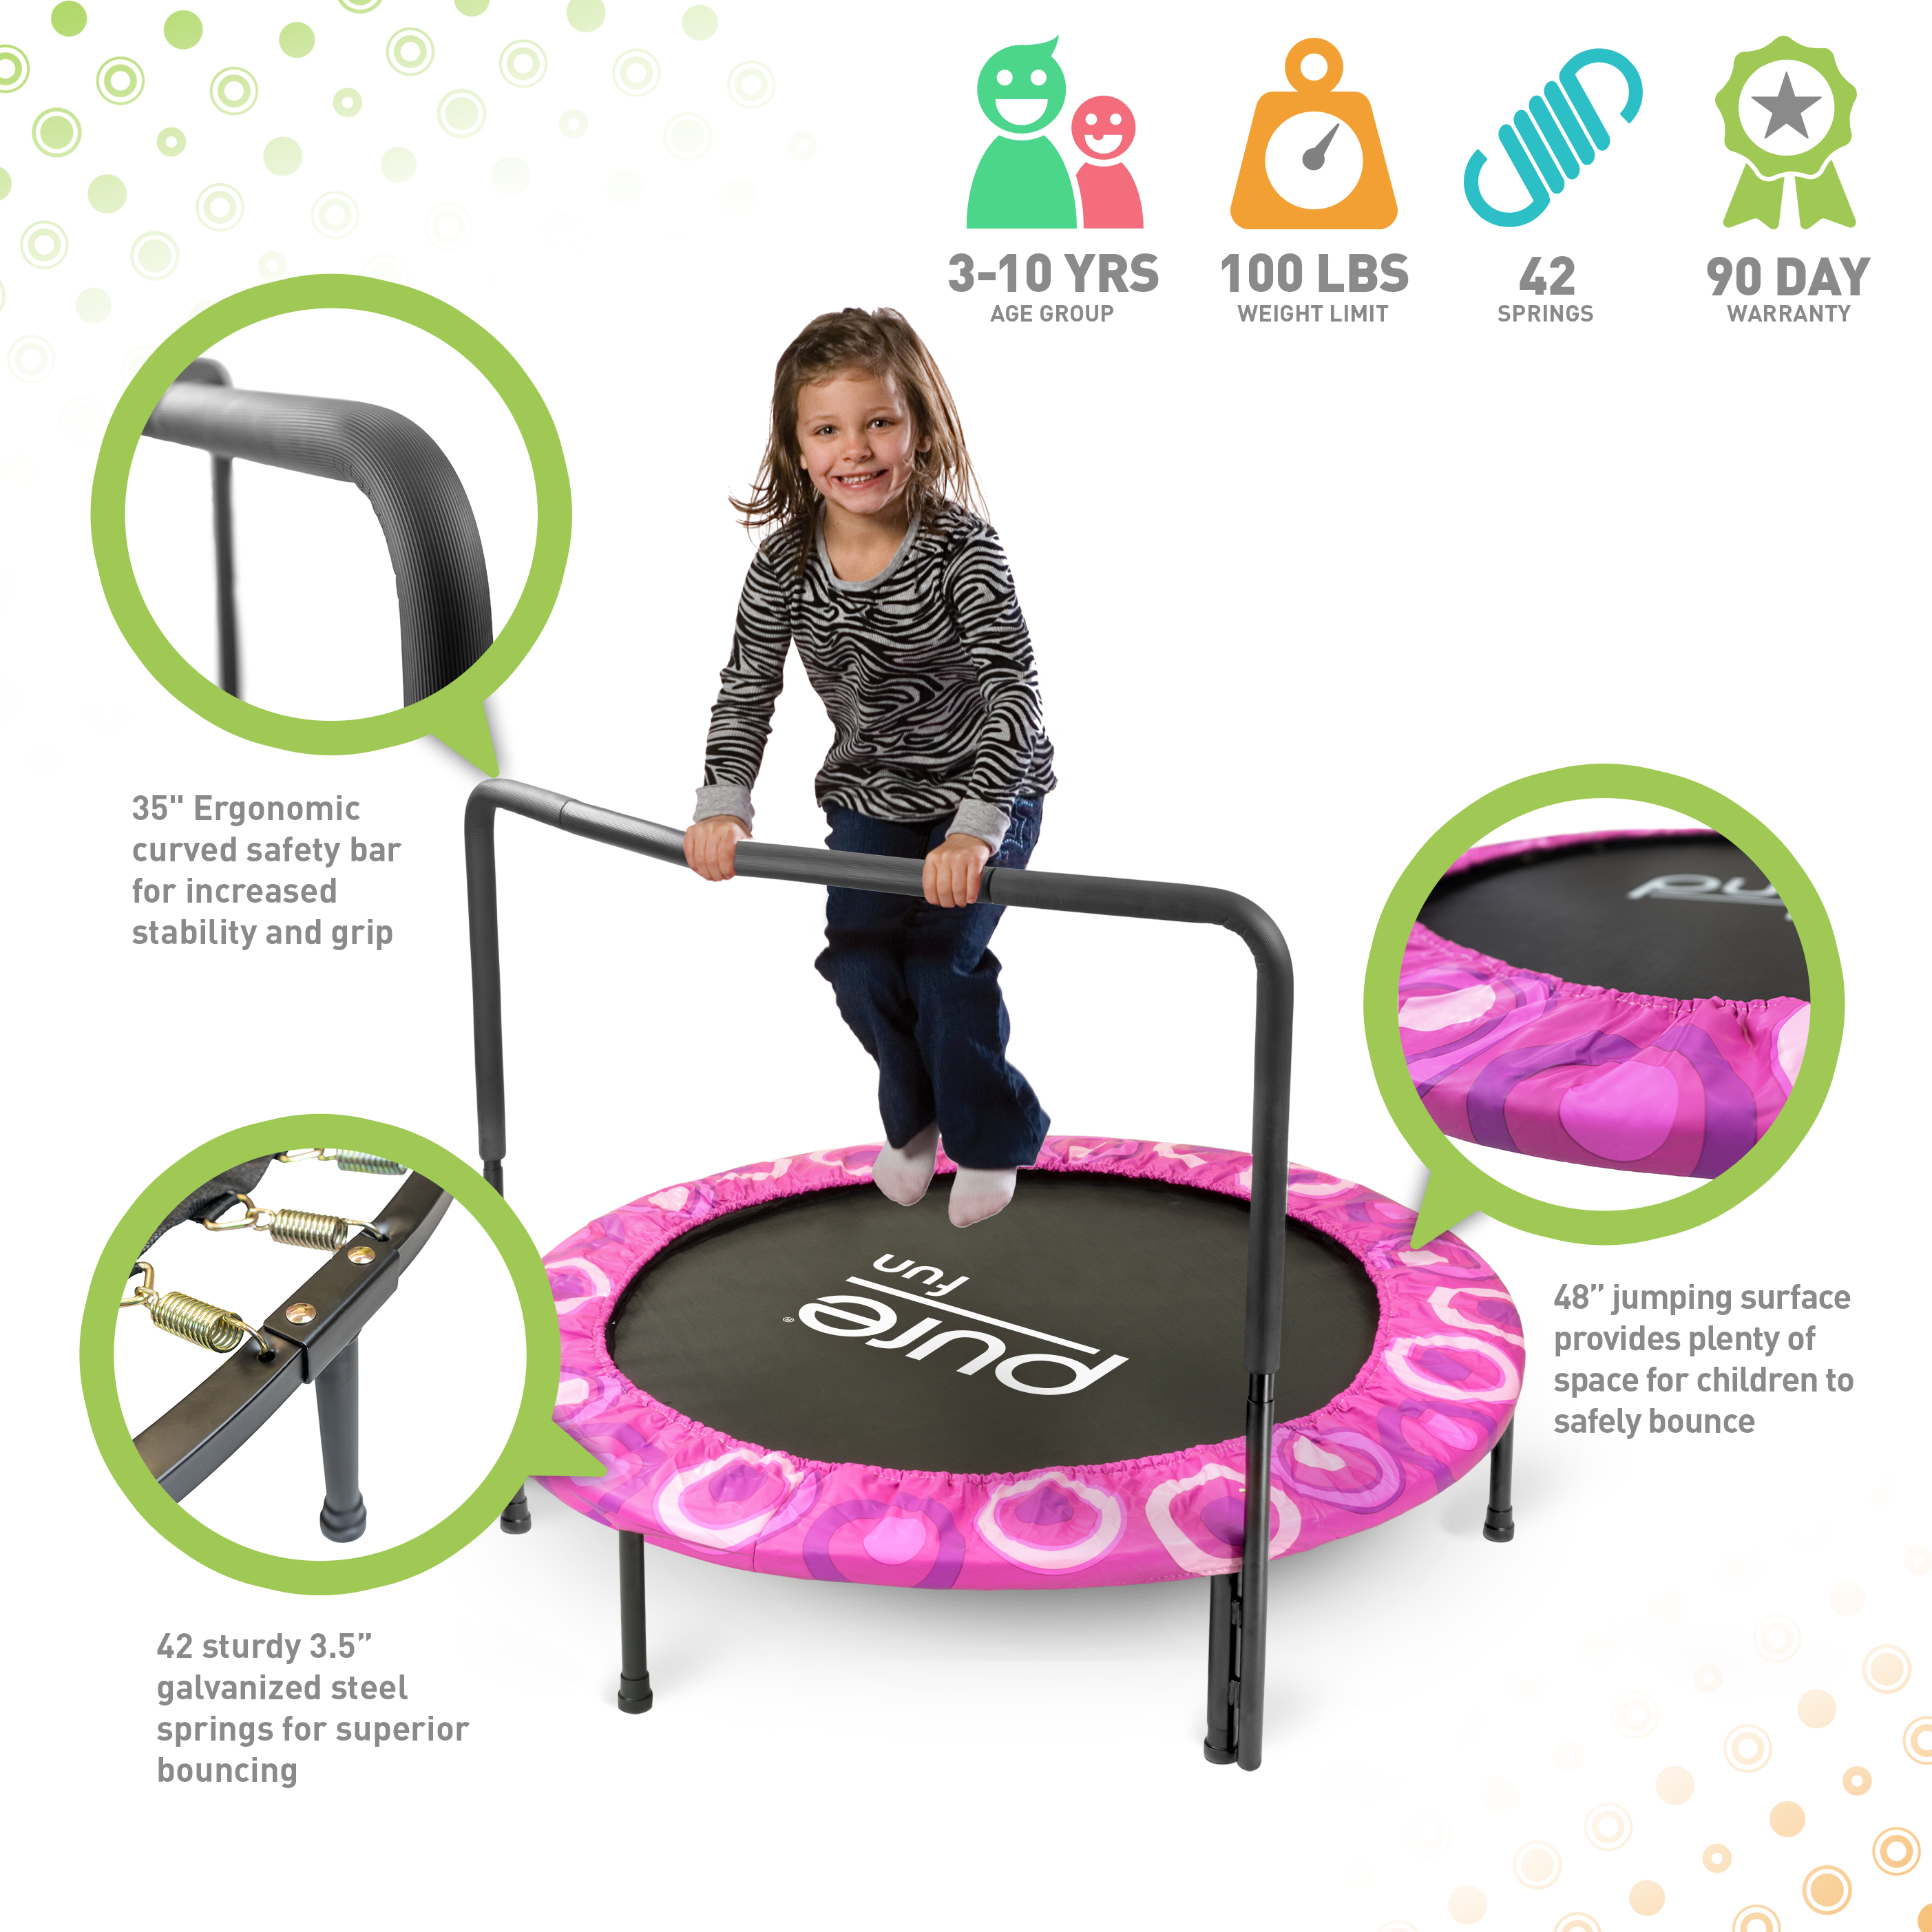 Pure Fun Super Jumper Kids 48-Inch Trampoline with Handrail, Pink, 100lb Weight Limit - image 2 of 6